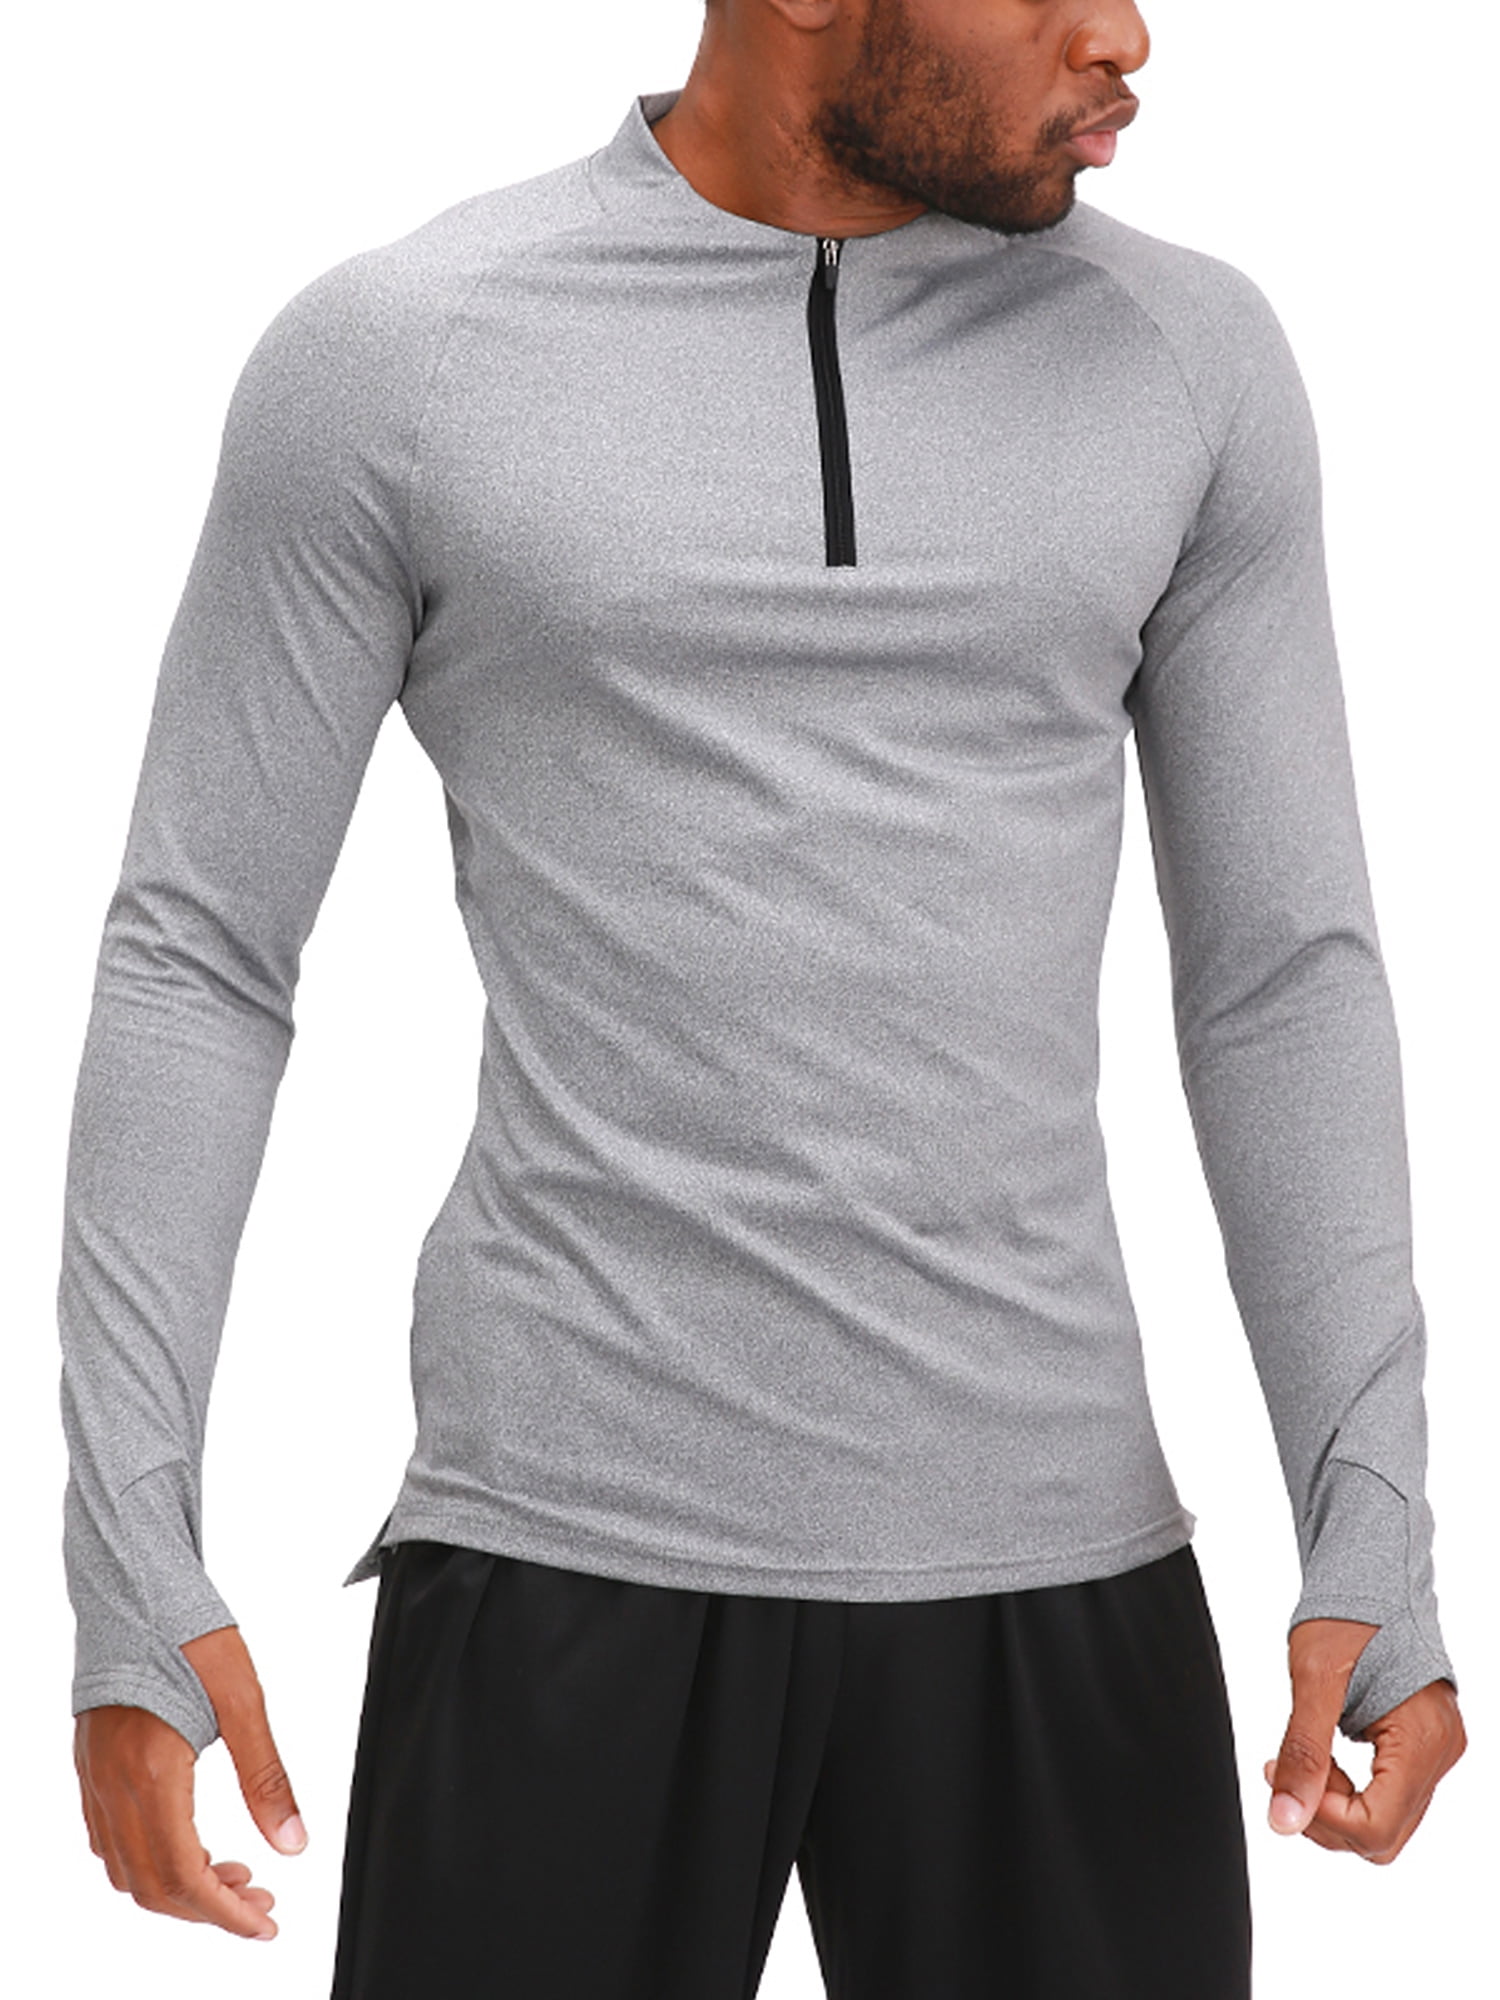 Athletic Tech Tees Performance Tops Pullovers 3-Pack Men's Dry Fit Crewneck Long Sleeve Running Shirts with Thumb Holes